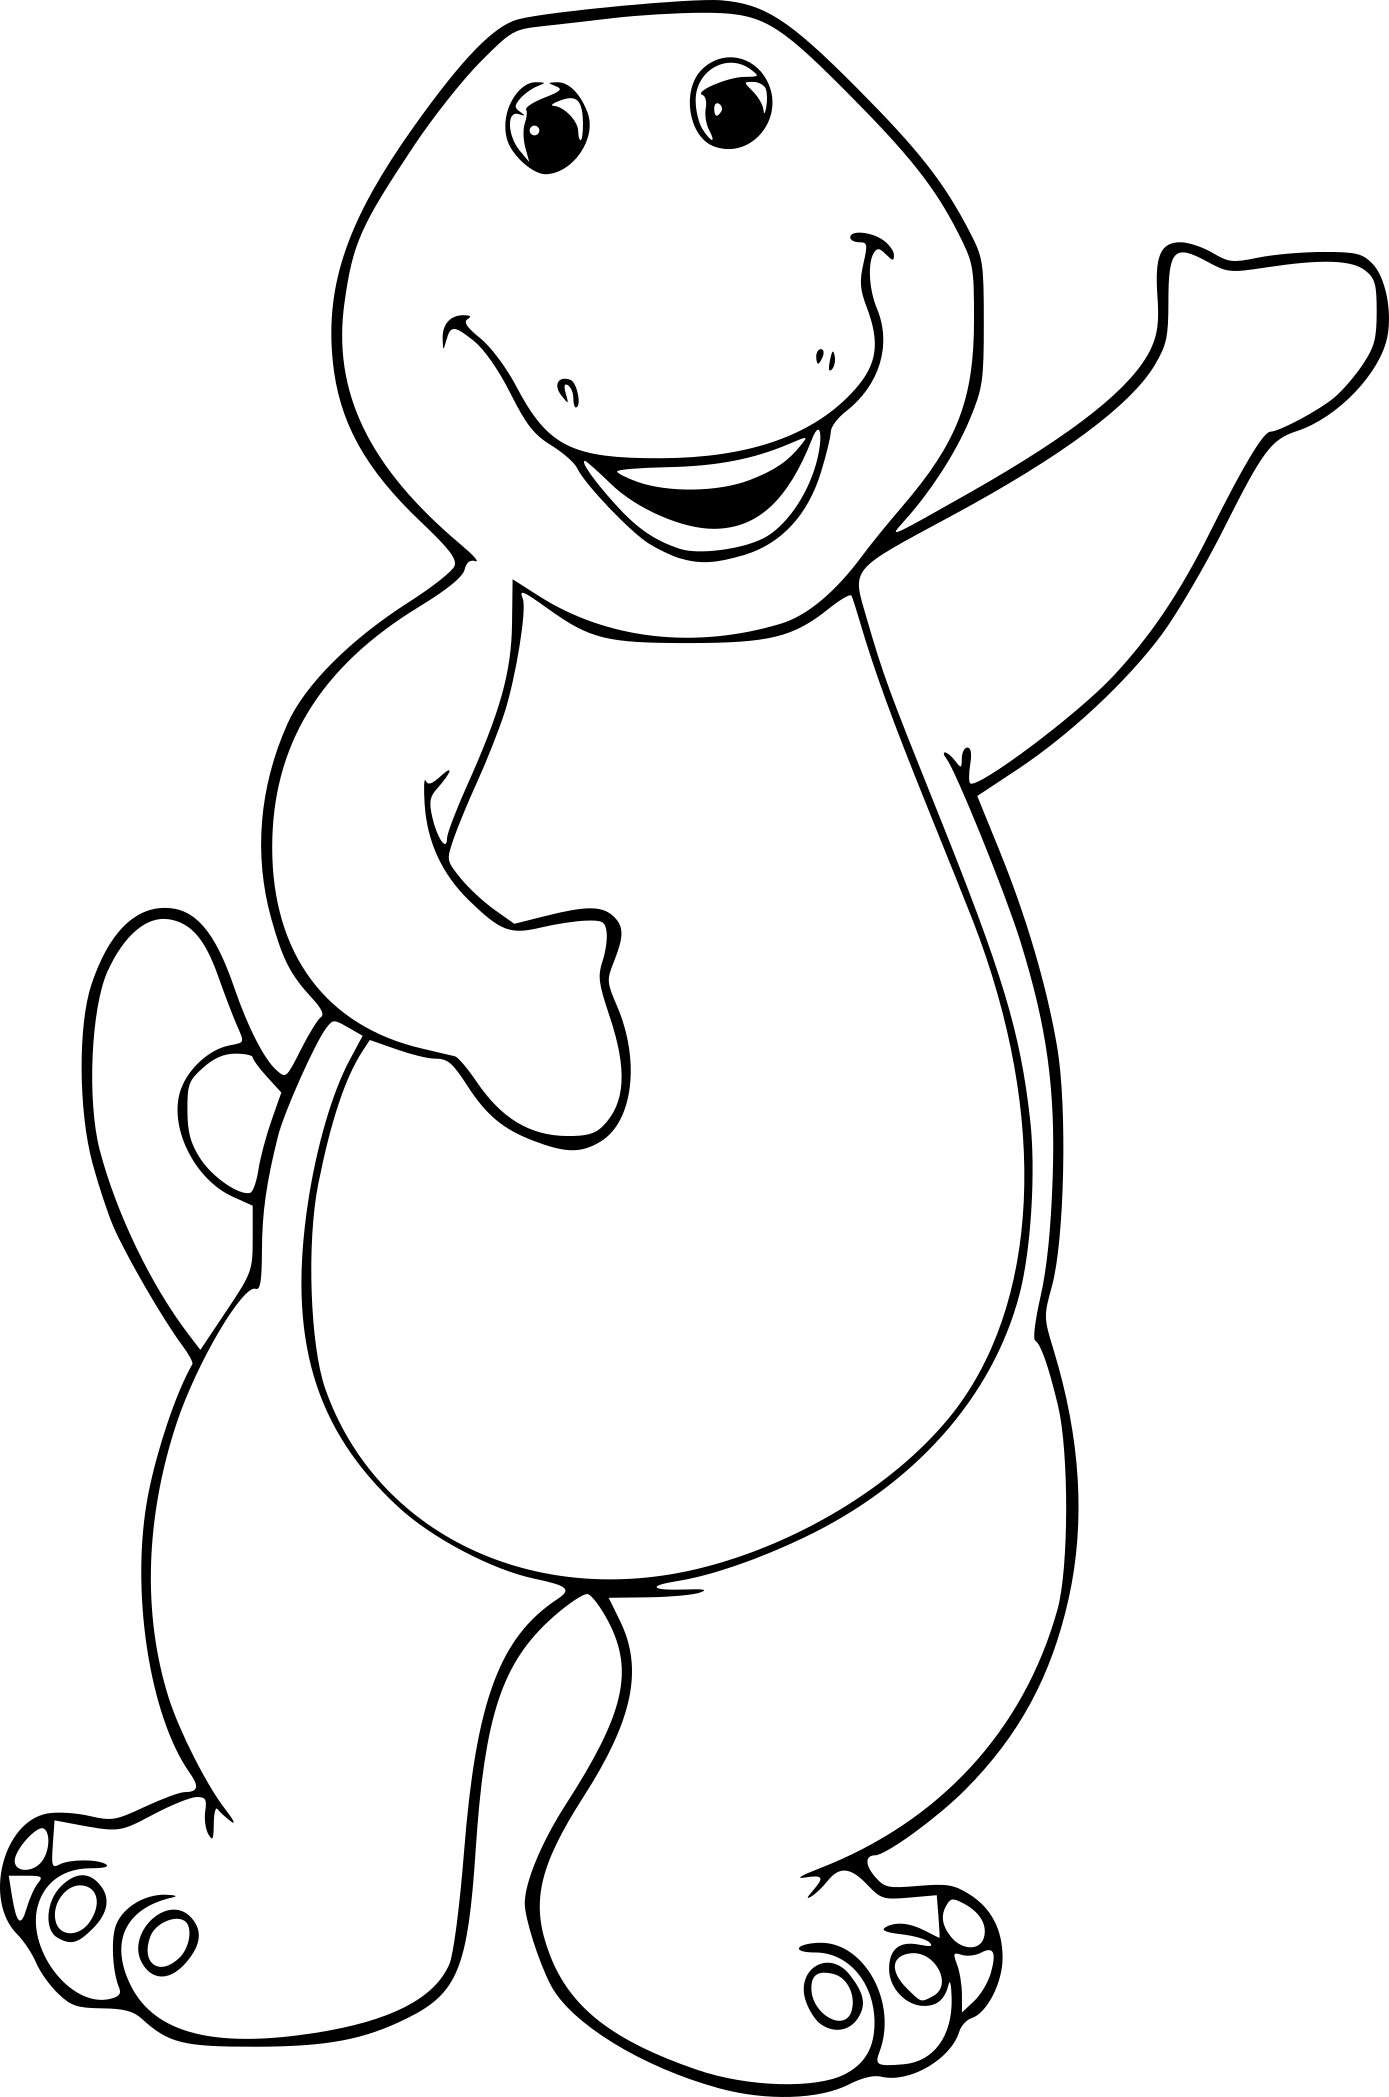 Barney coloring page